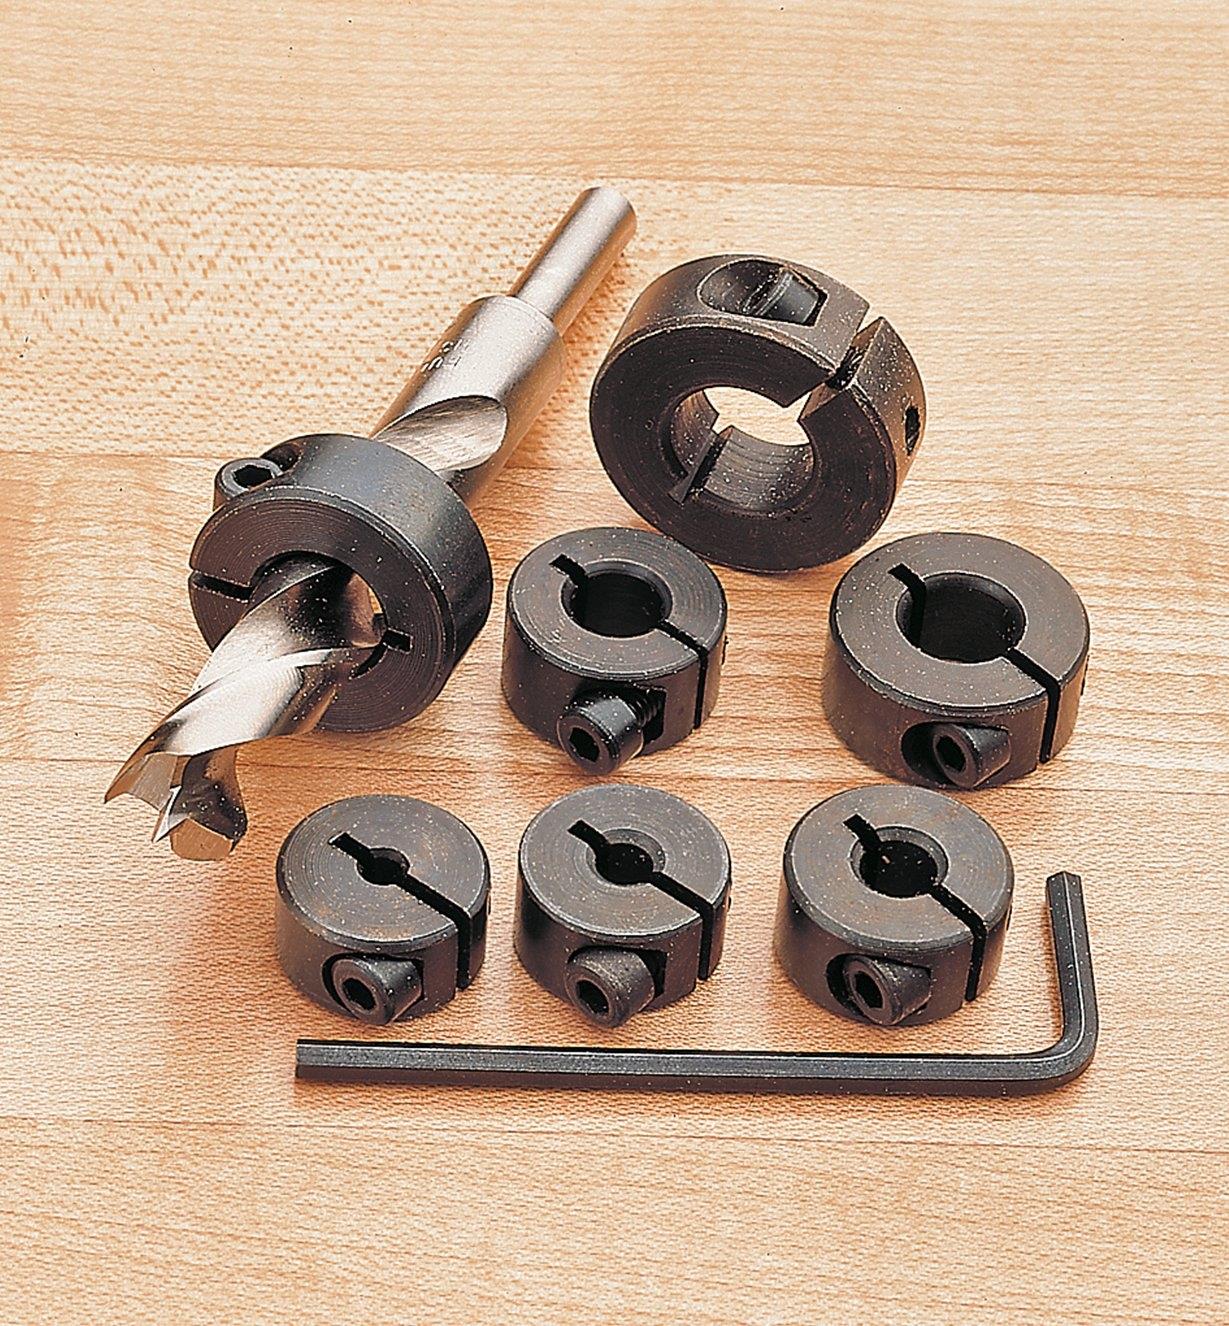 Set of 7 Collars, with one of them in place on a drill bit as an example